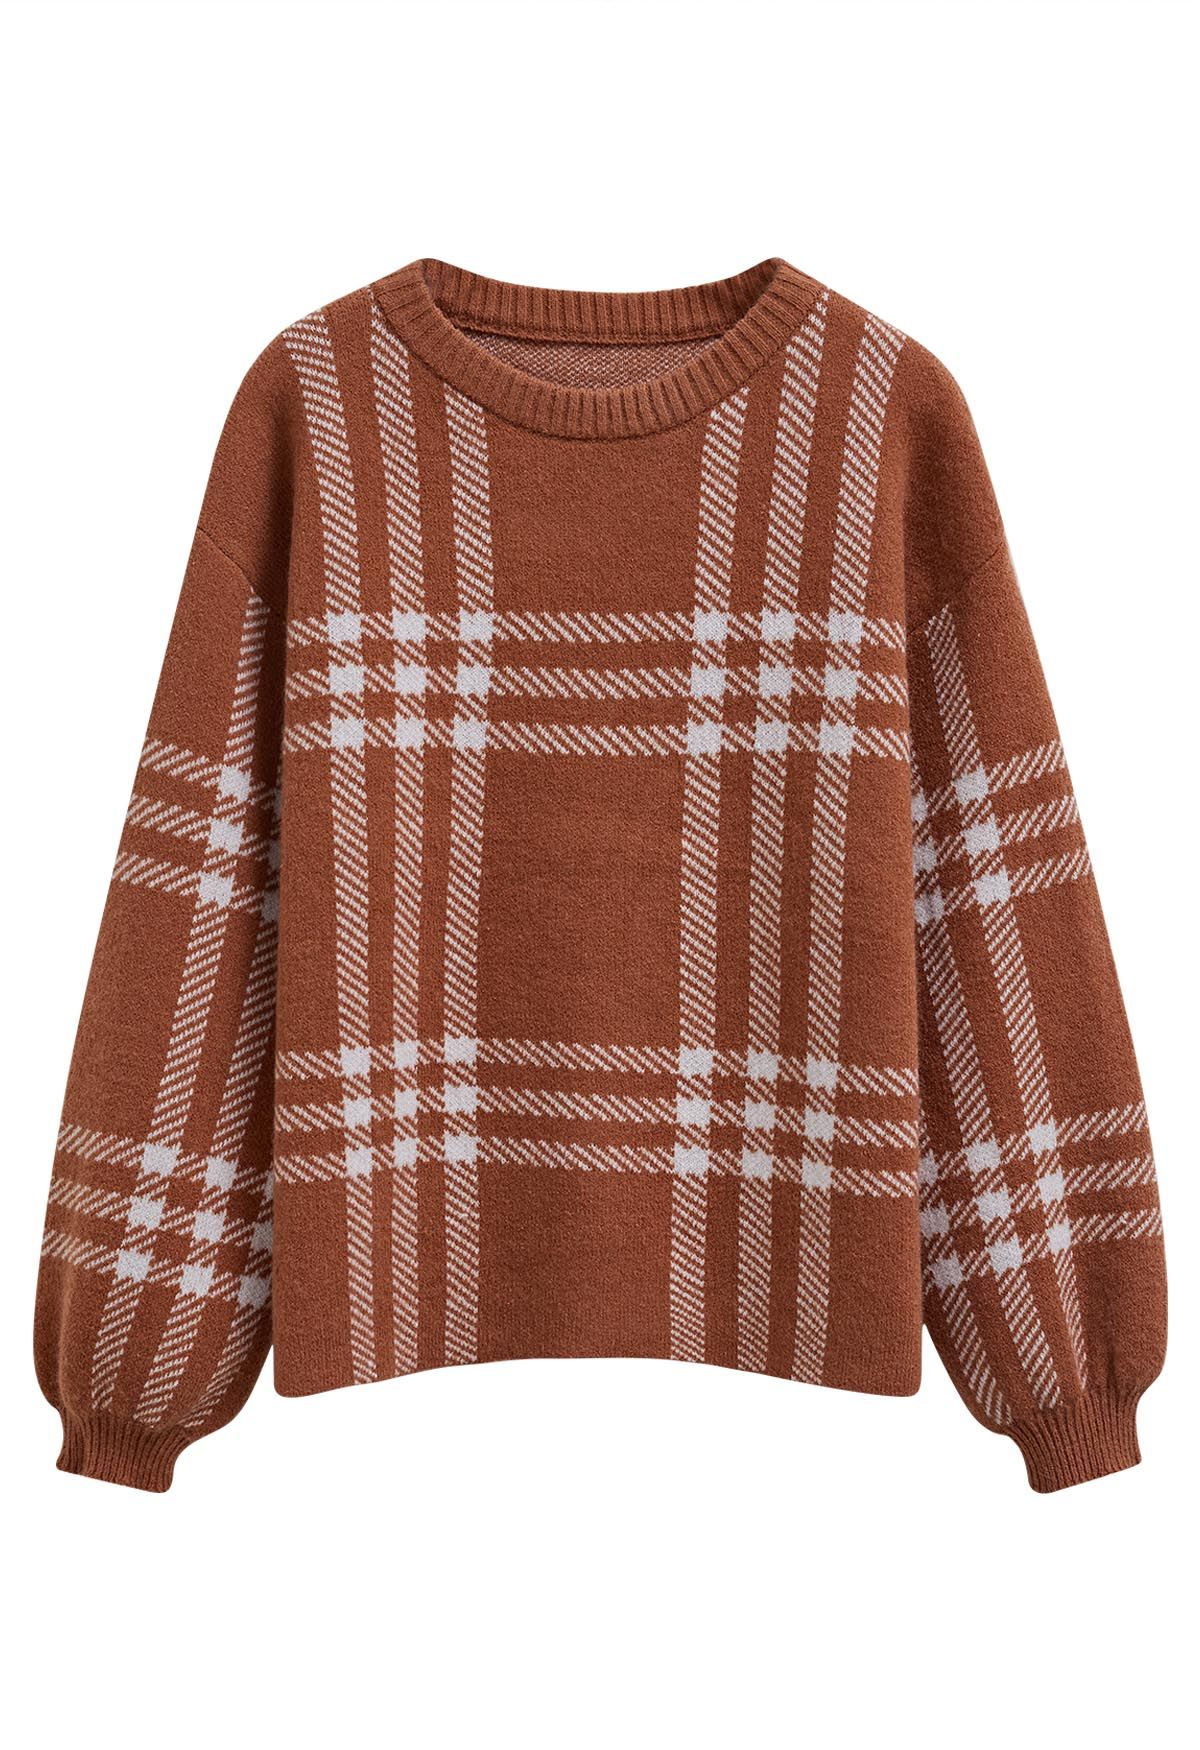 Classic Plaid Round Neck Knit Sweater in Caramel